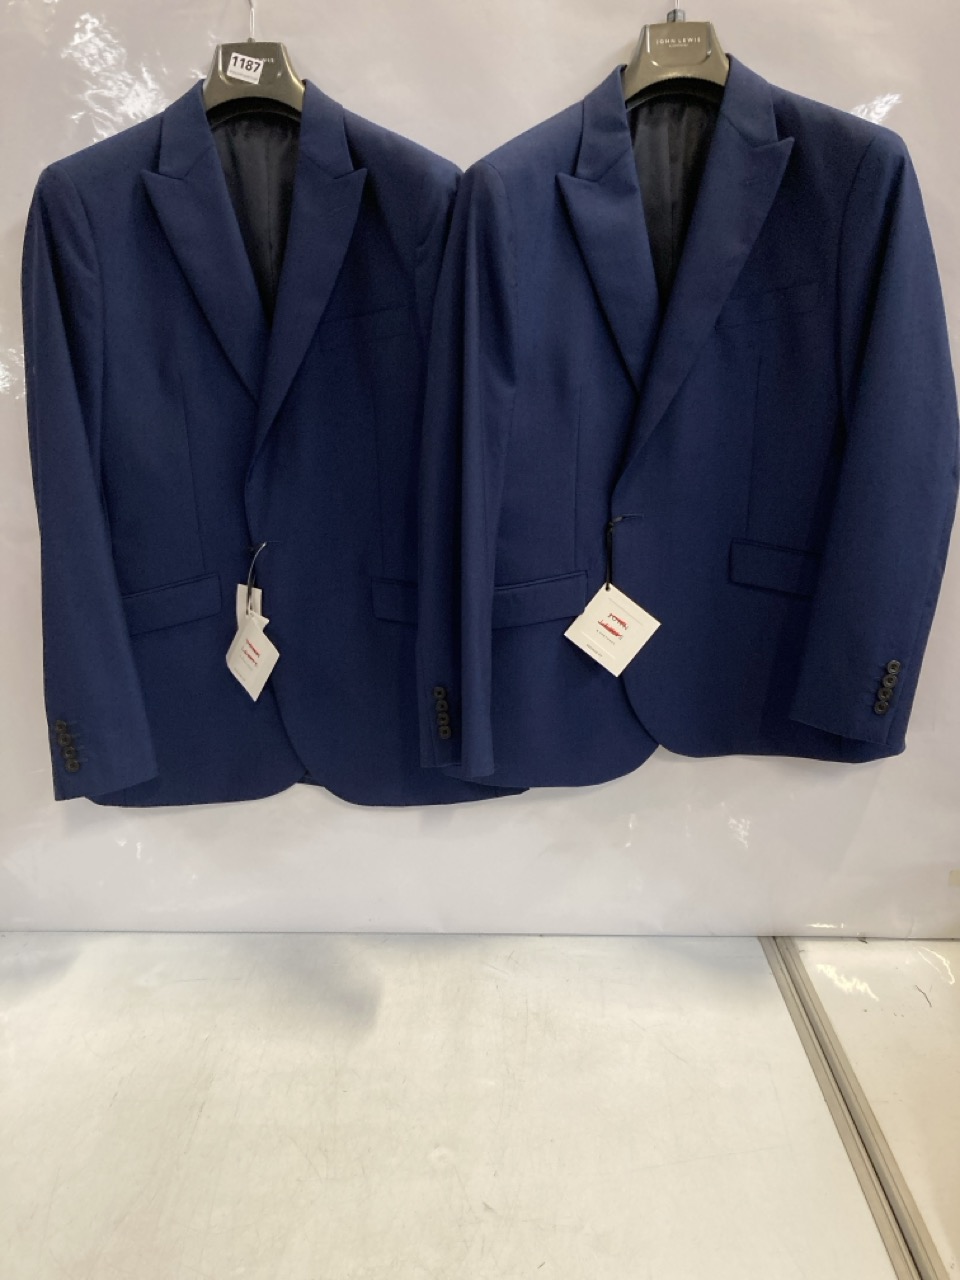 3 X MEN'S SUIT JACKETS TO INCLUDE JOHN LEWIS WOOL MOHAIR IN BLUE 46S